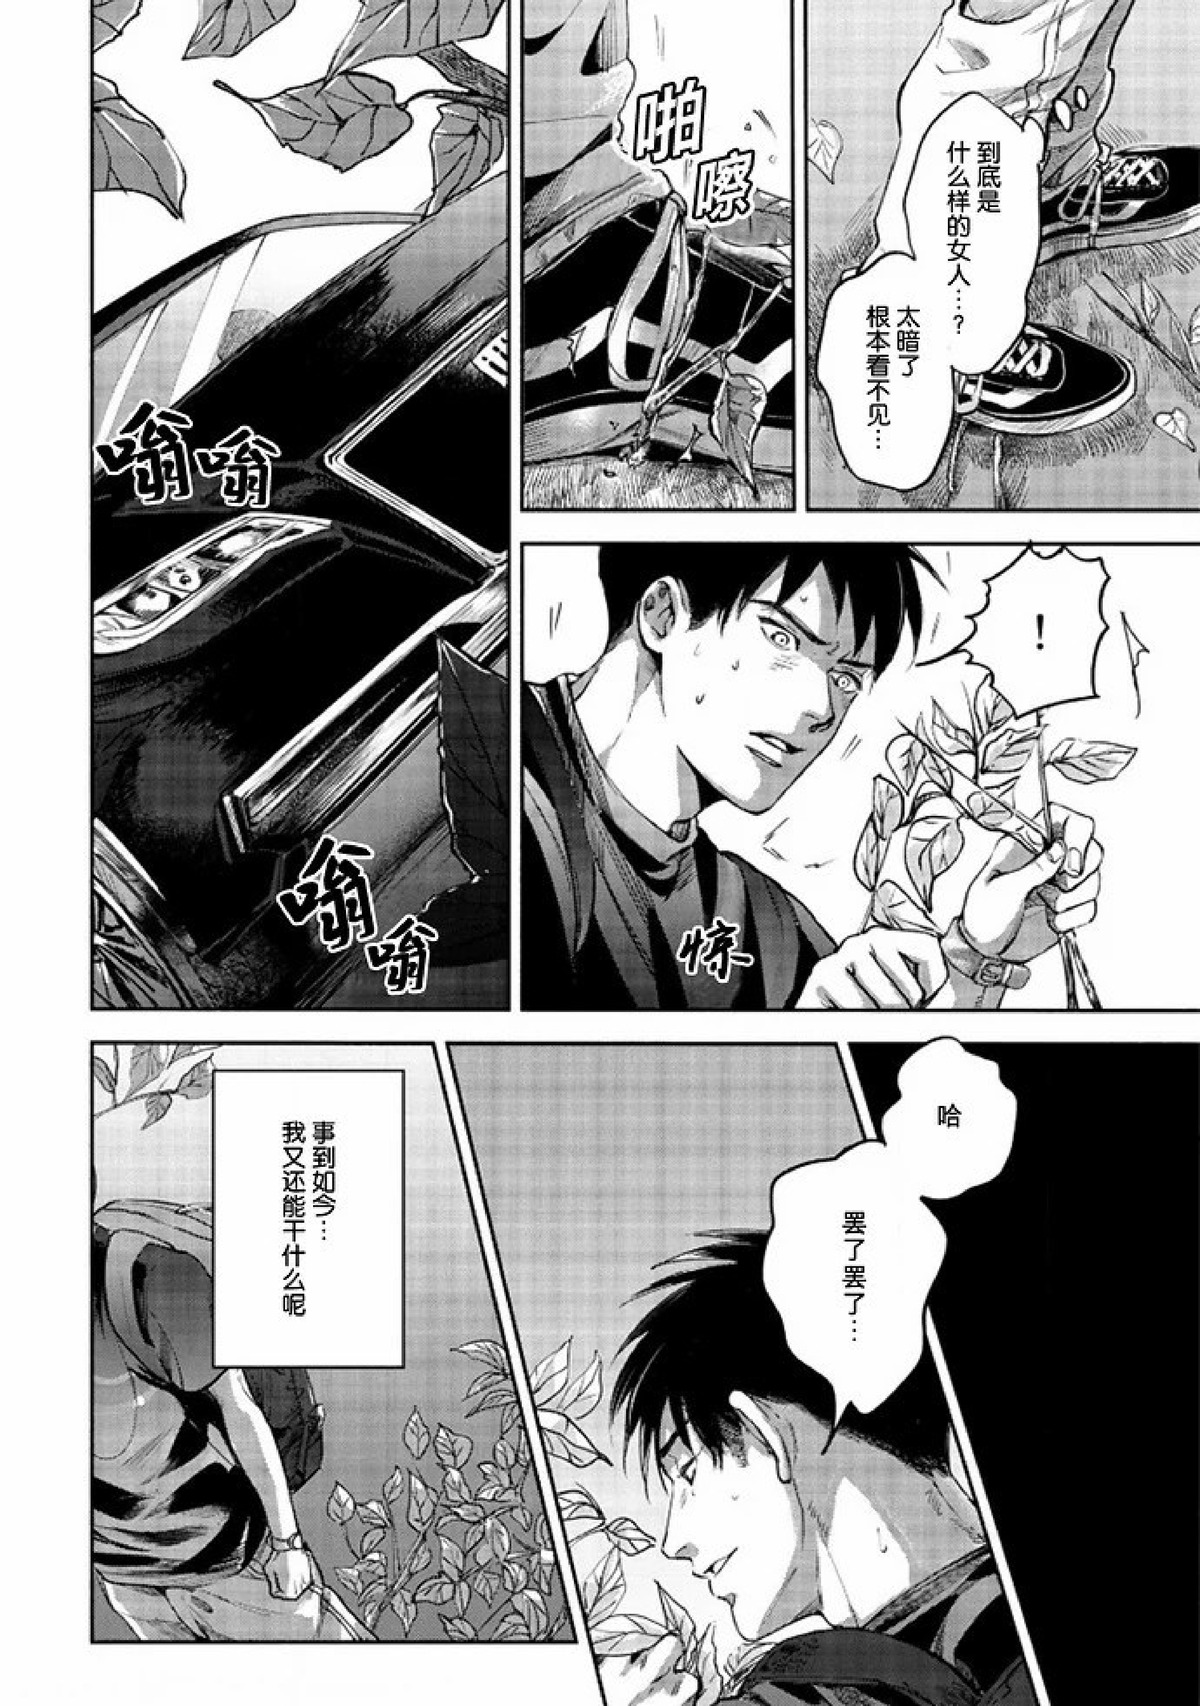 【Two sides of the same coin[腐漫]】漫画-（上卷01-02）章节漫画下拉式图片-29.jpg